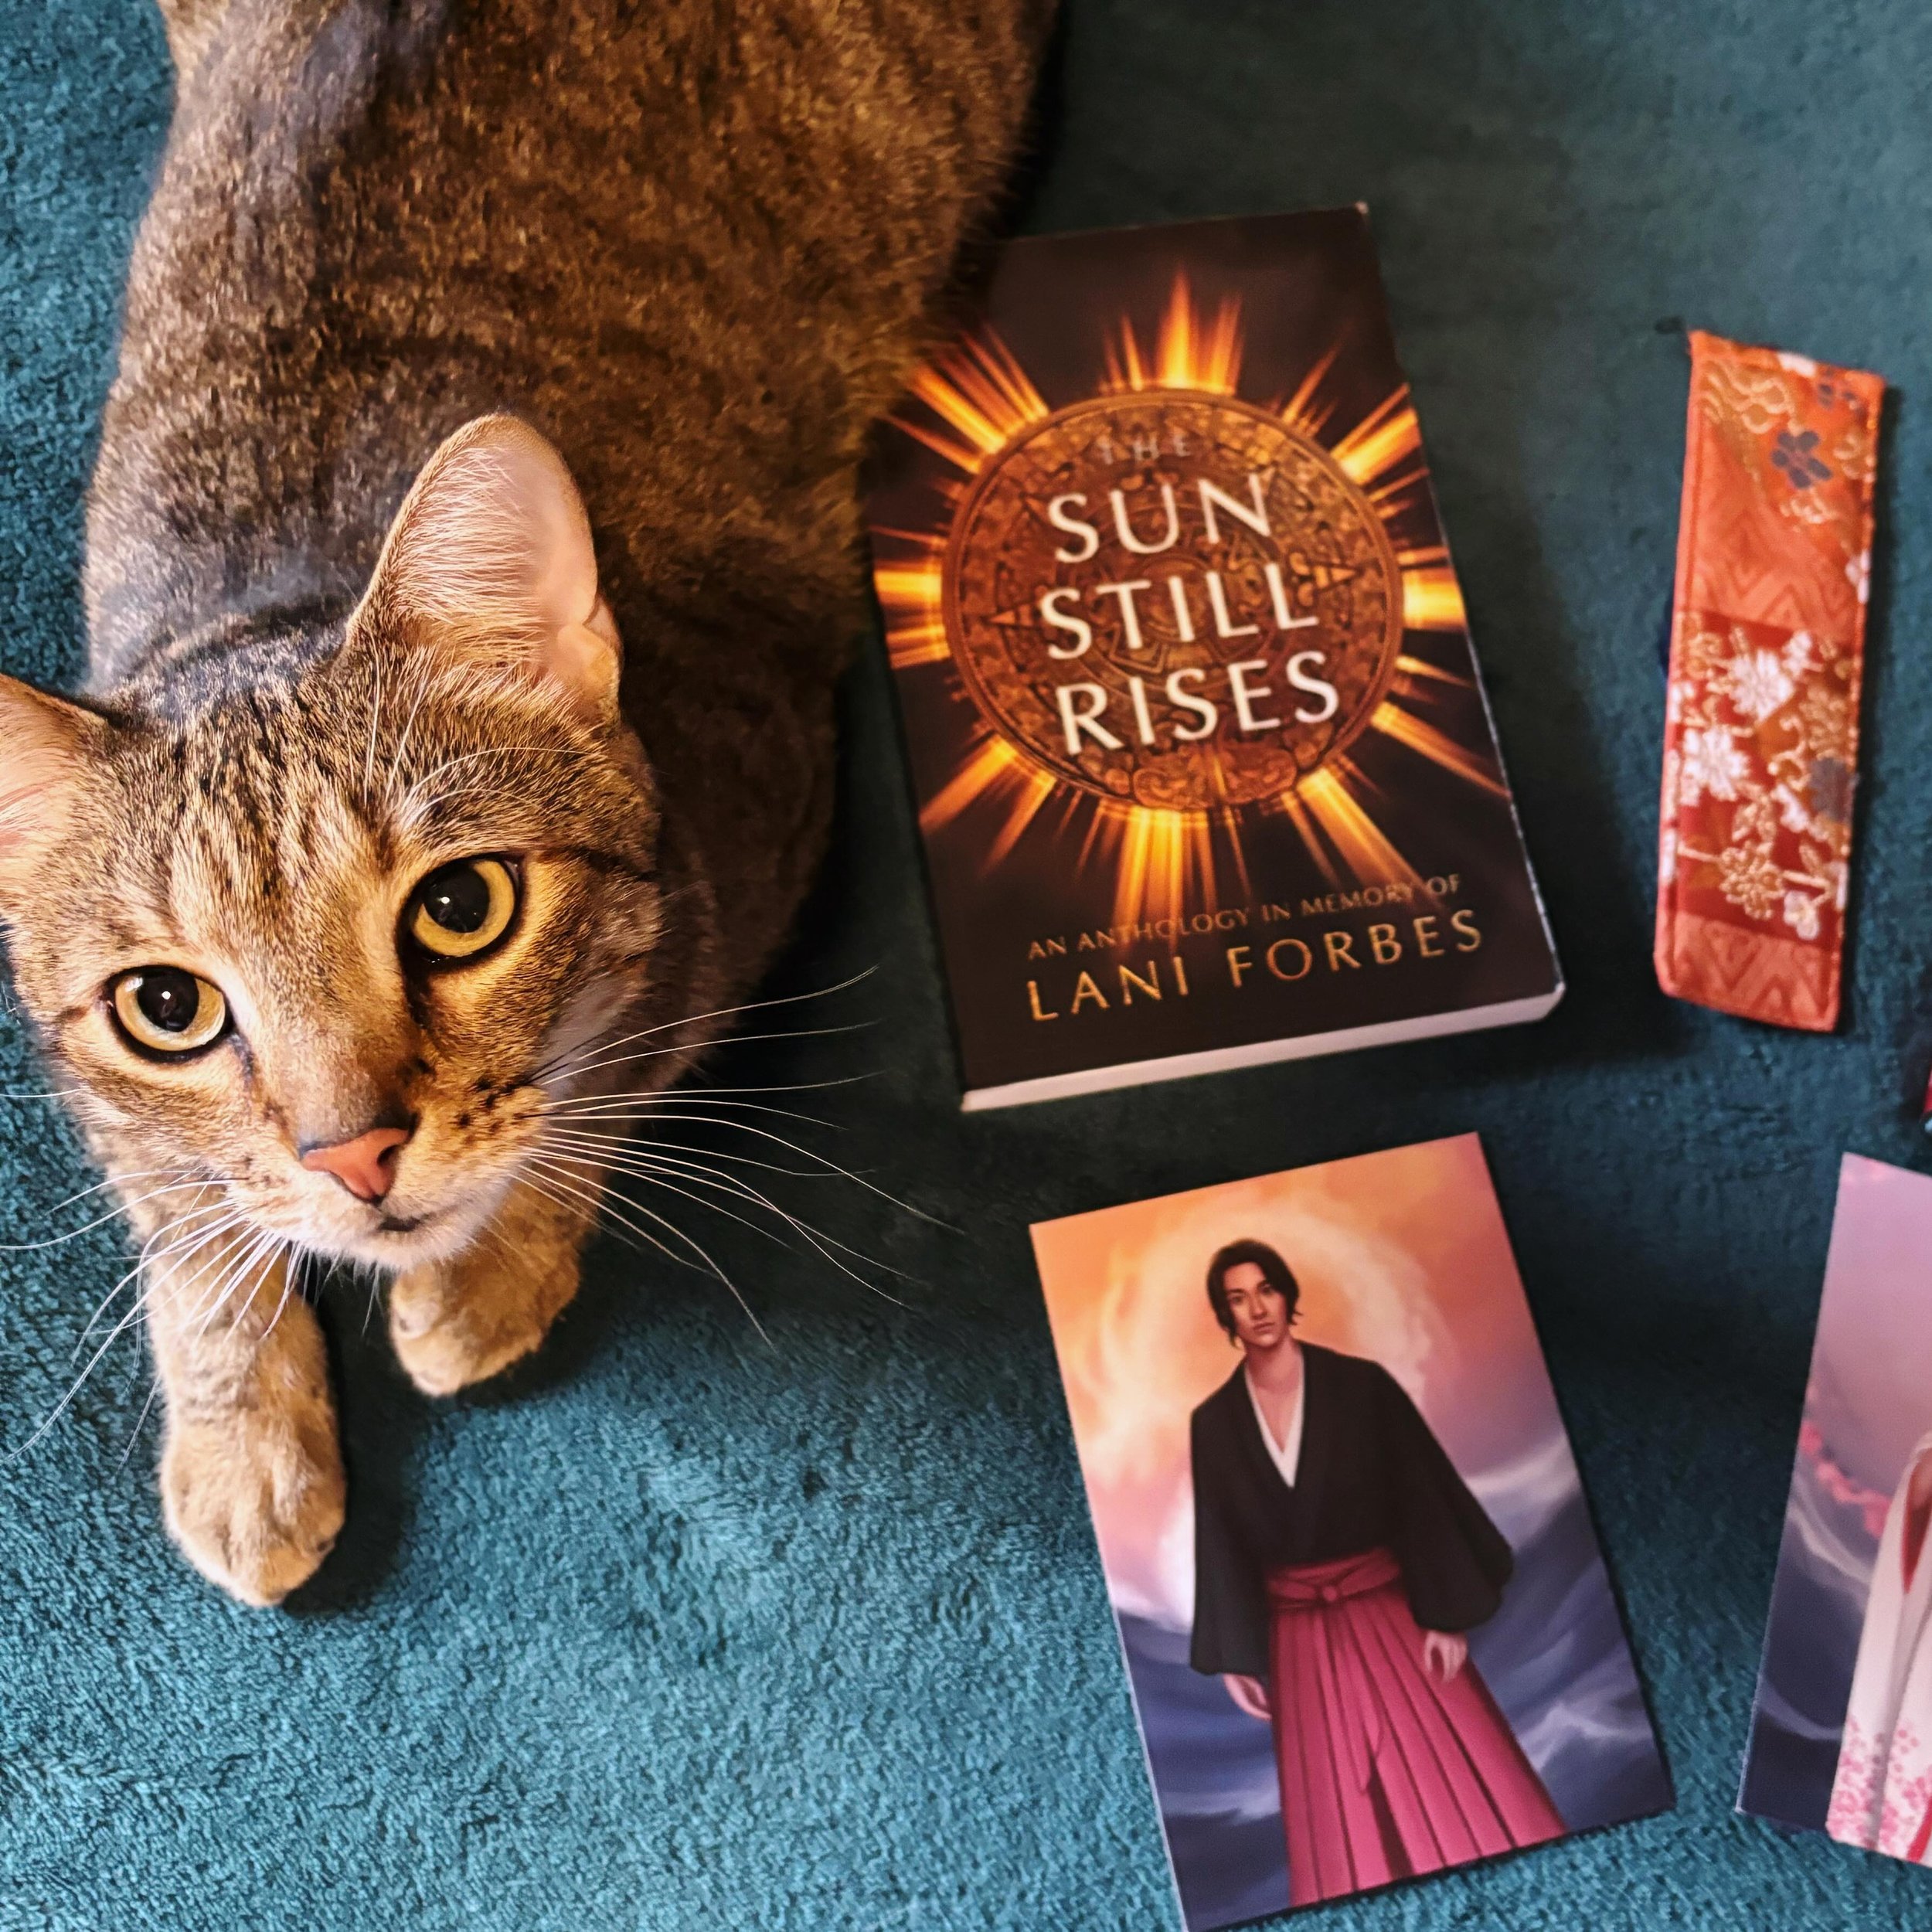 Keefe pretending he isn&rsquo;t a stinker 😻

I&rsquo;m currently reading SAINTS AND MONSTERS by @ellenmcginty_author , which is what those art pieces and kimono bookmark are from. I recently read a part where the main character Meera visits Fever Ho